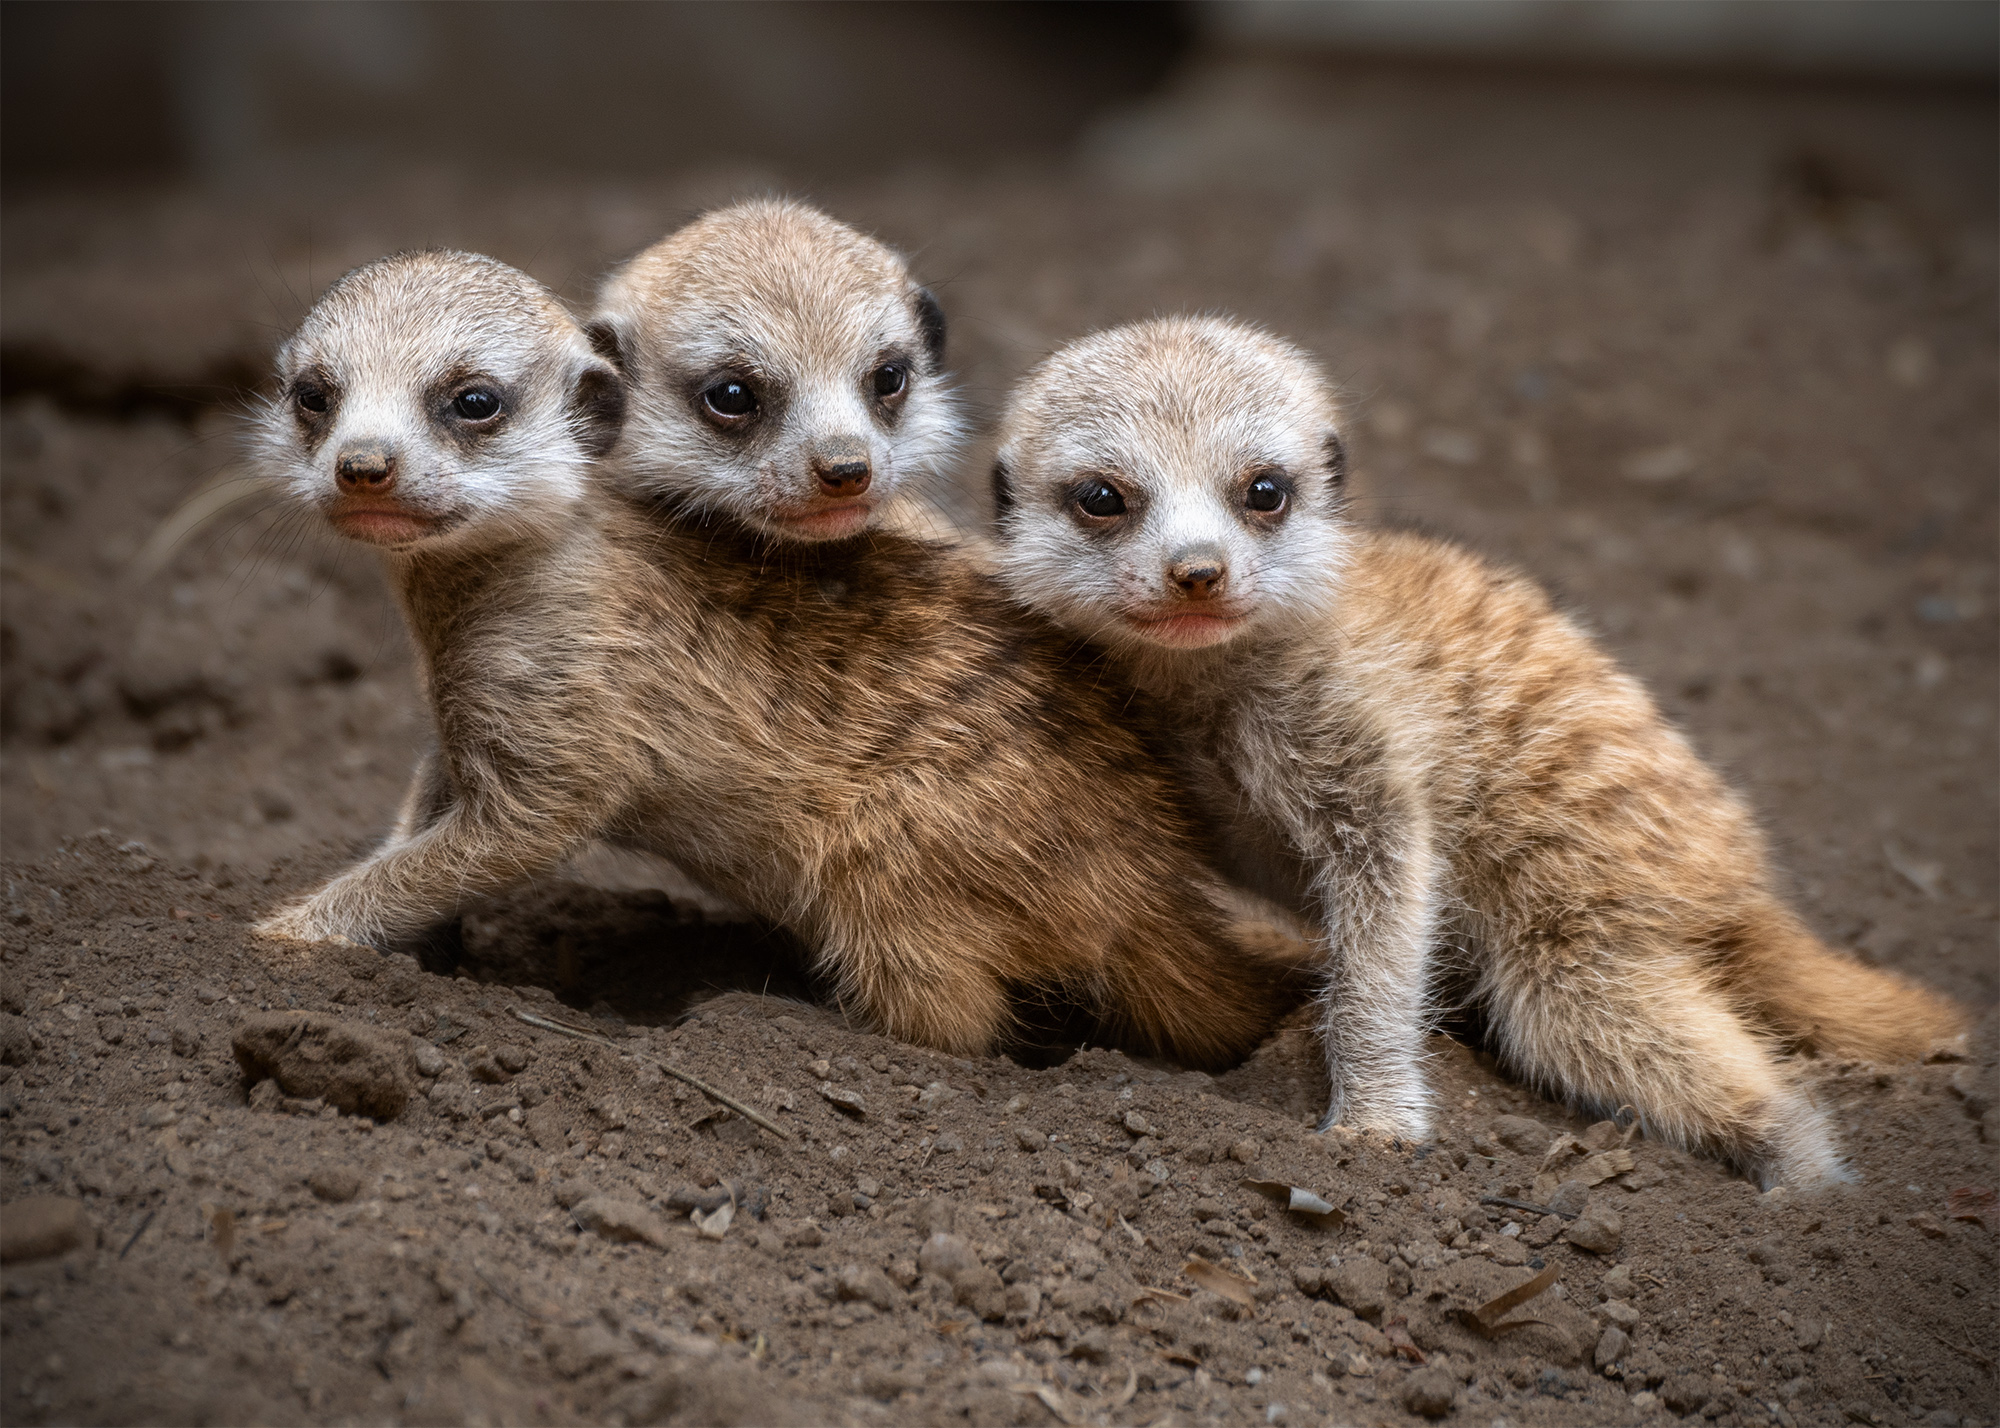 Three young meerkats sitting next to each other.